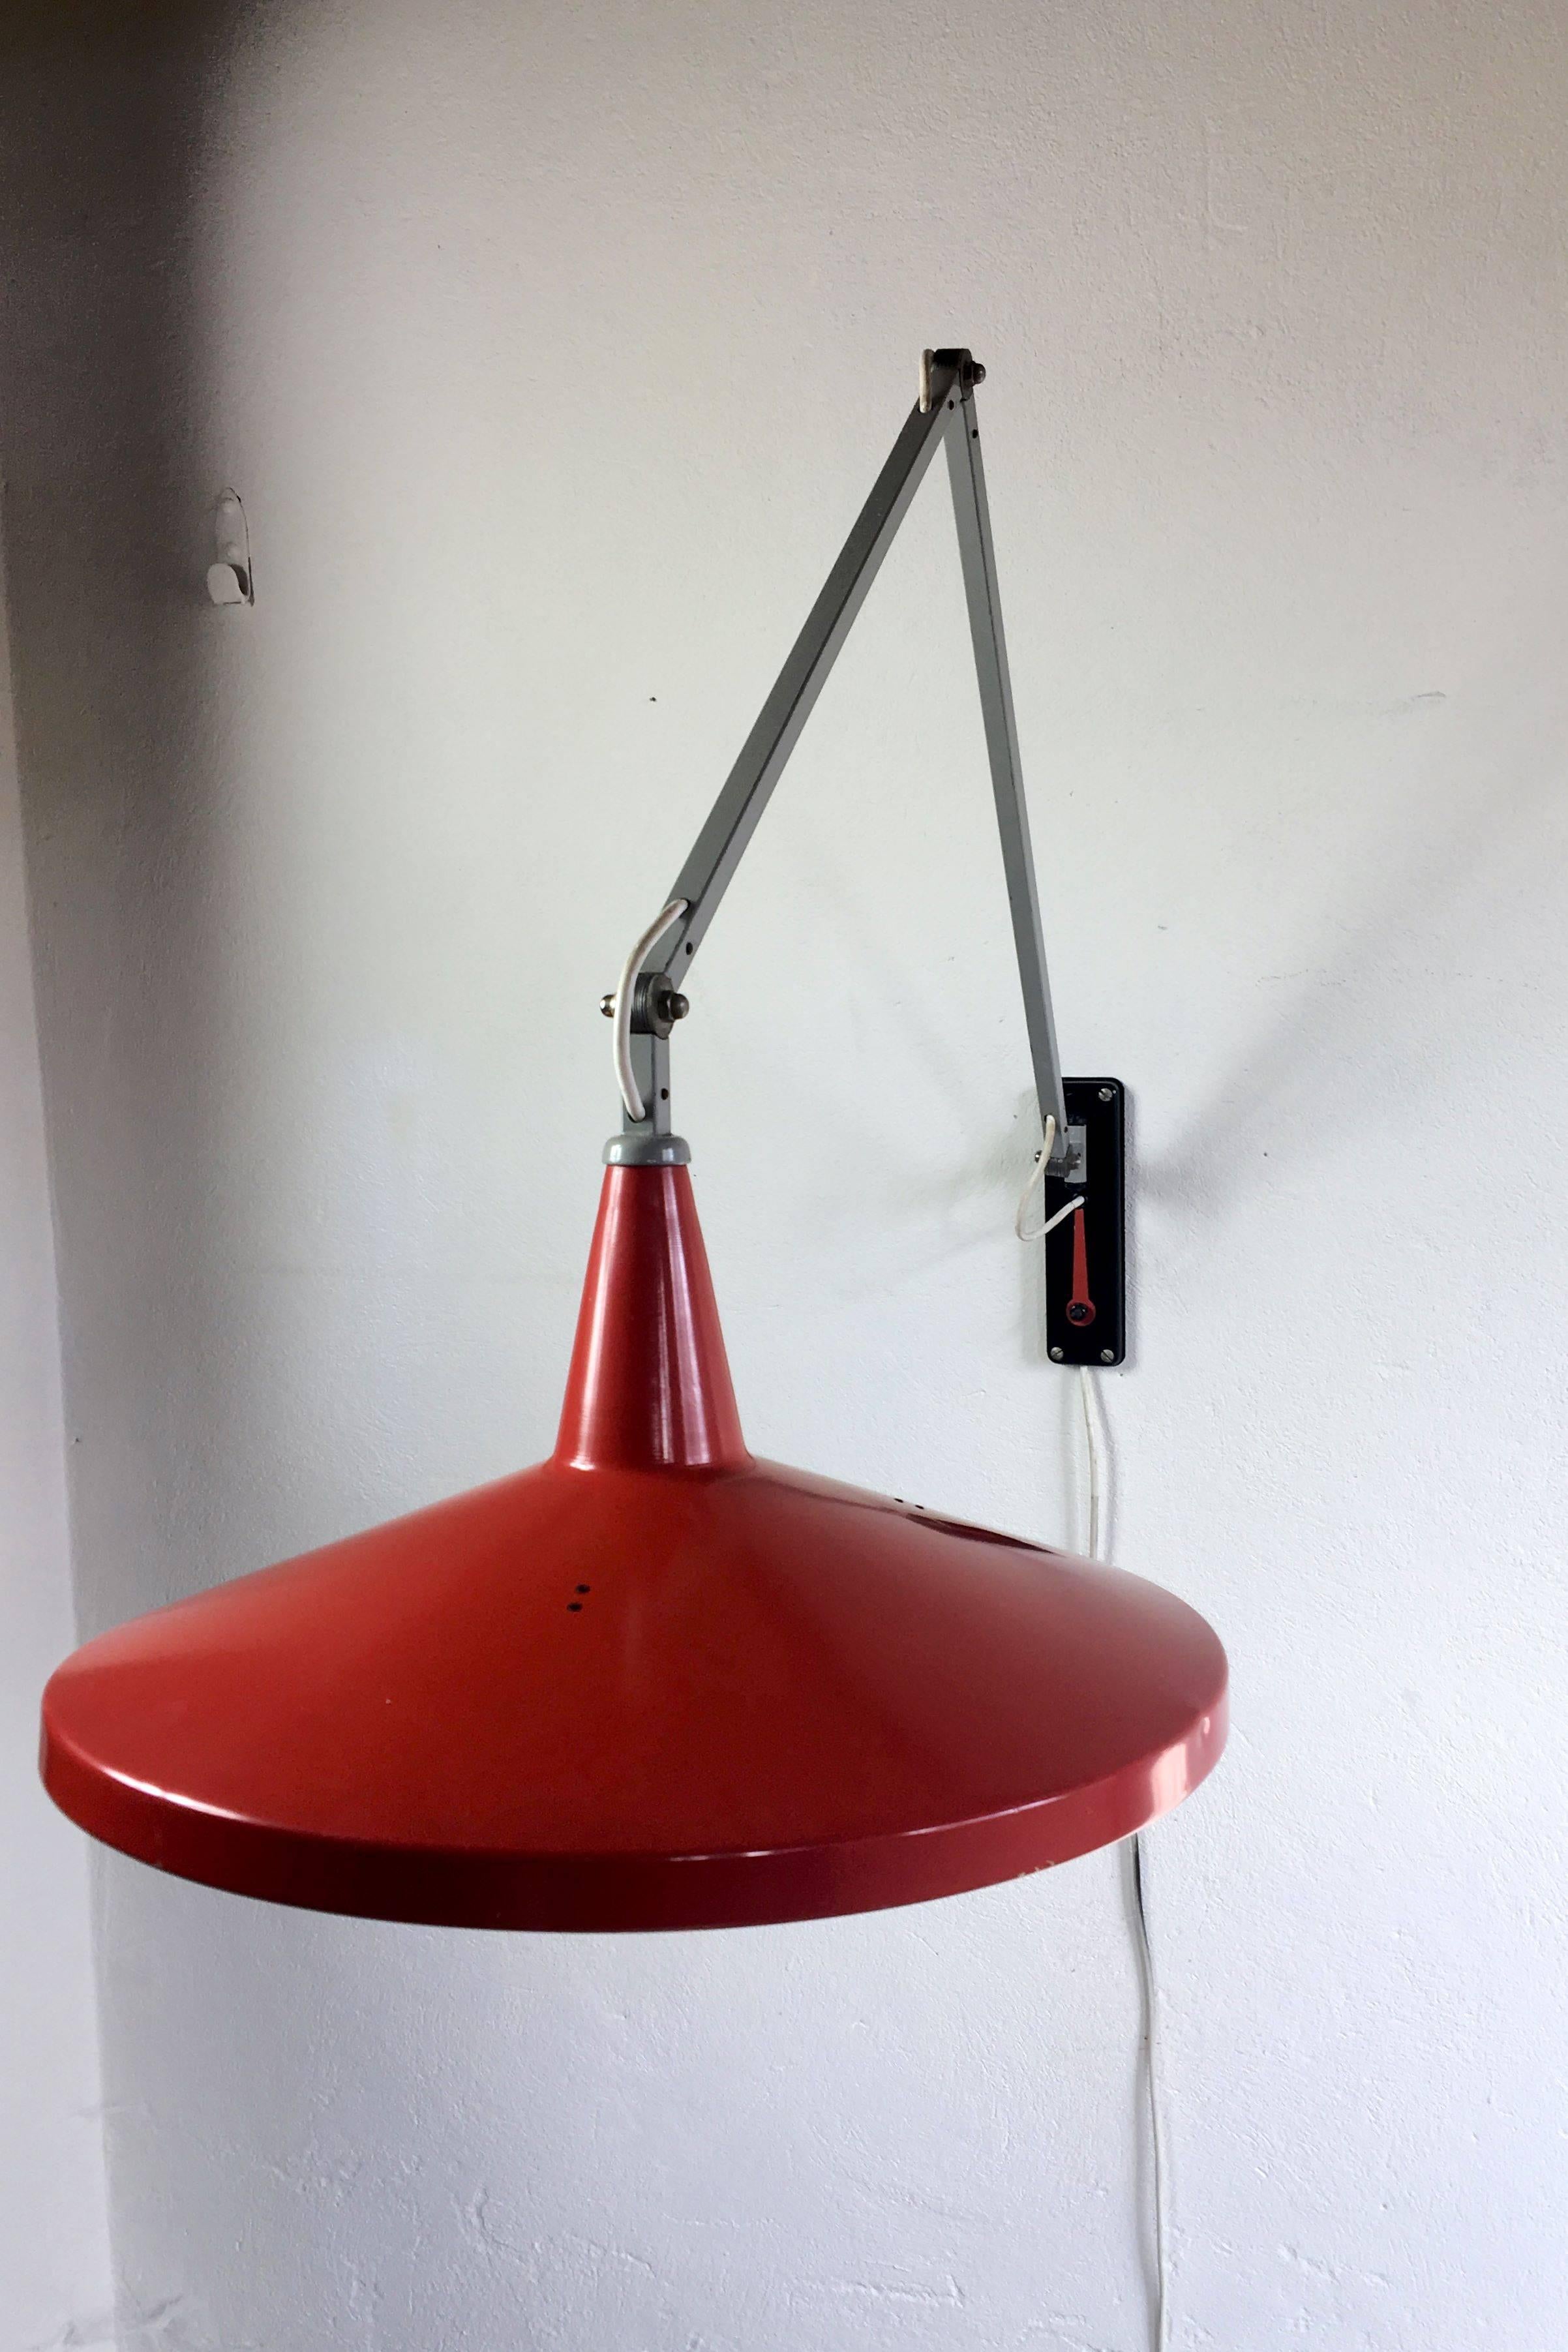 A true Dutch design Classic, this Gispen Giso 4050 designed by Wim Rietveld in 1953 quickly became known as the 'panama hat' lamp for its distinctive shape.

The arm has three points of articulation and the lamp includes a small red wrench